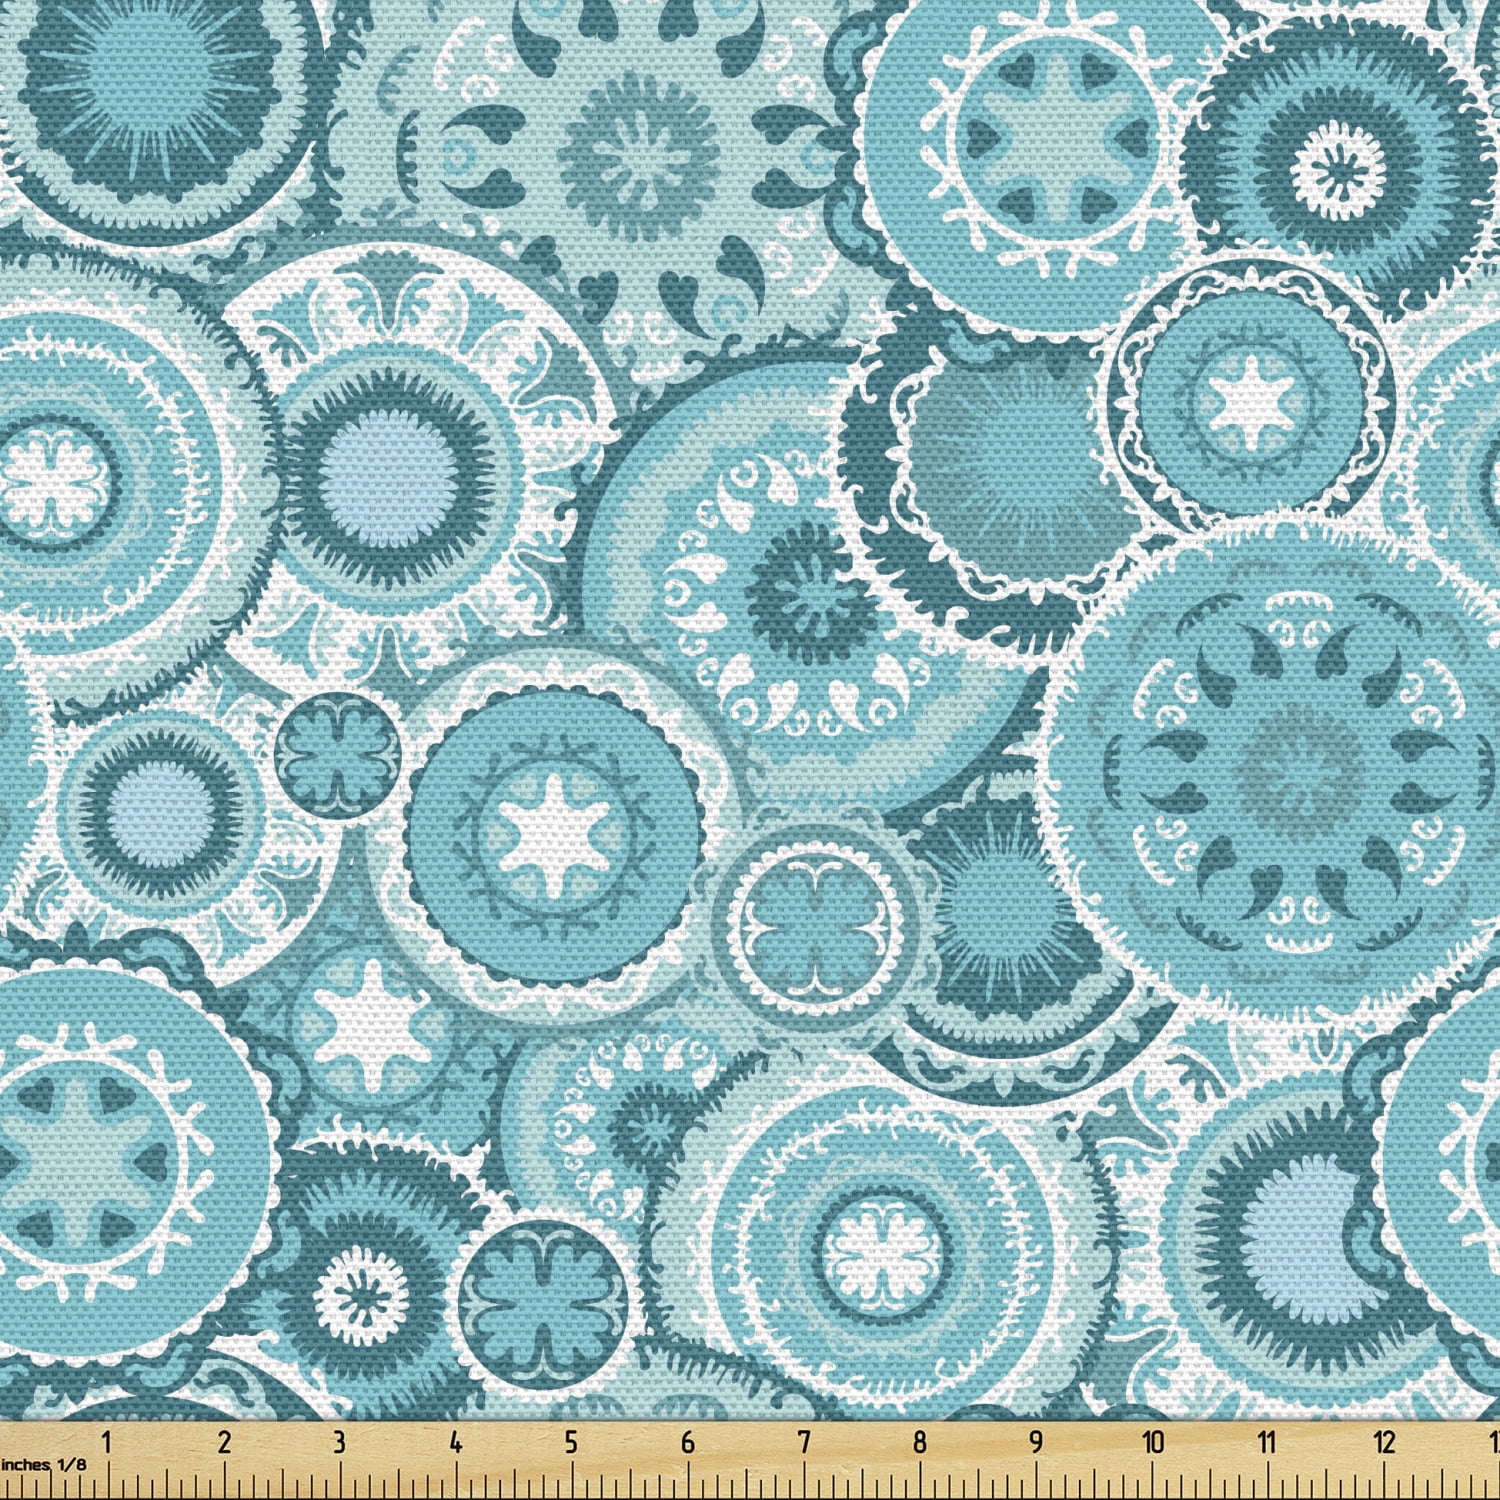 Turquoise Blue Aqua Patterned Floral Themed 100% Cotton Patchwork Fabric 